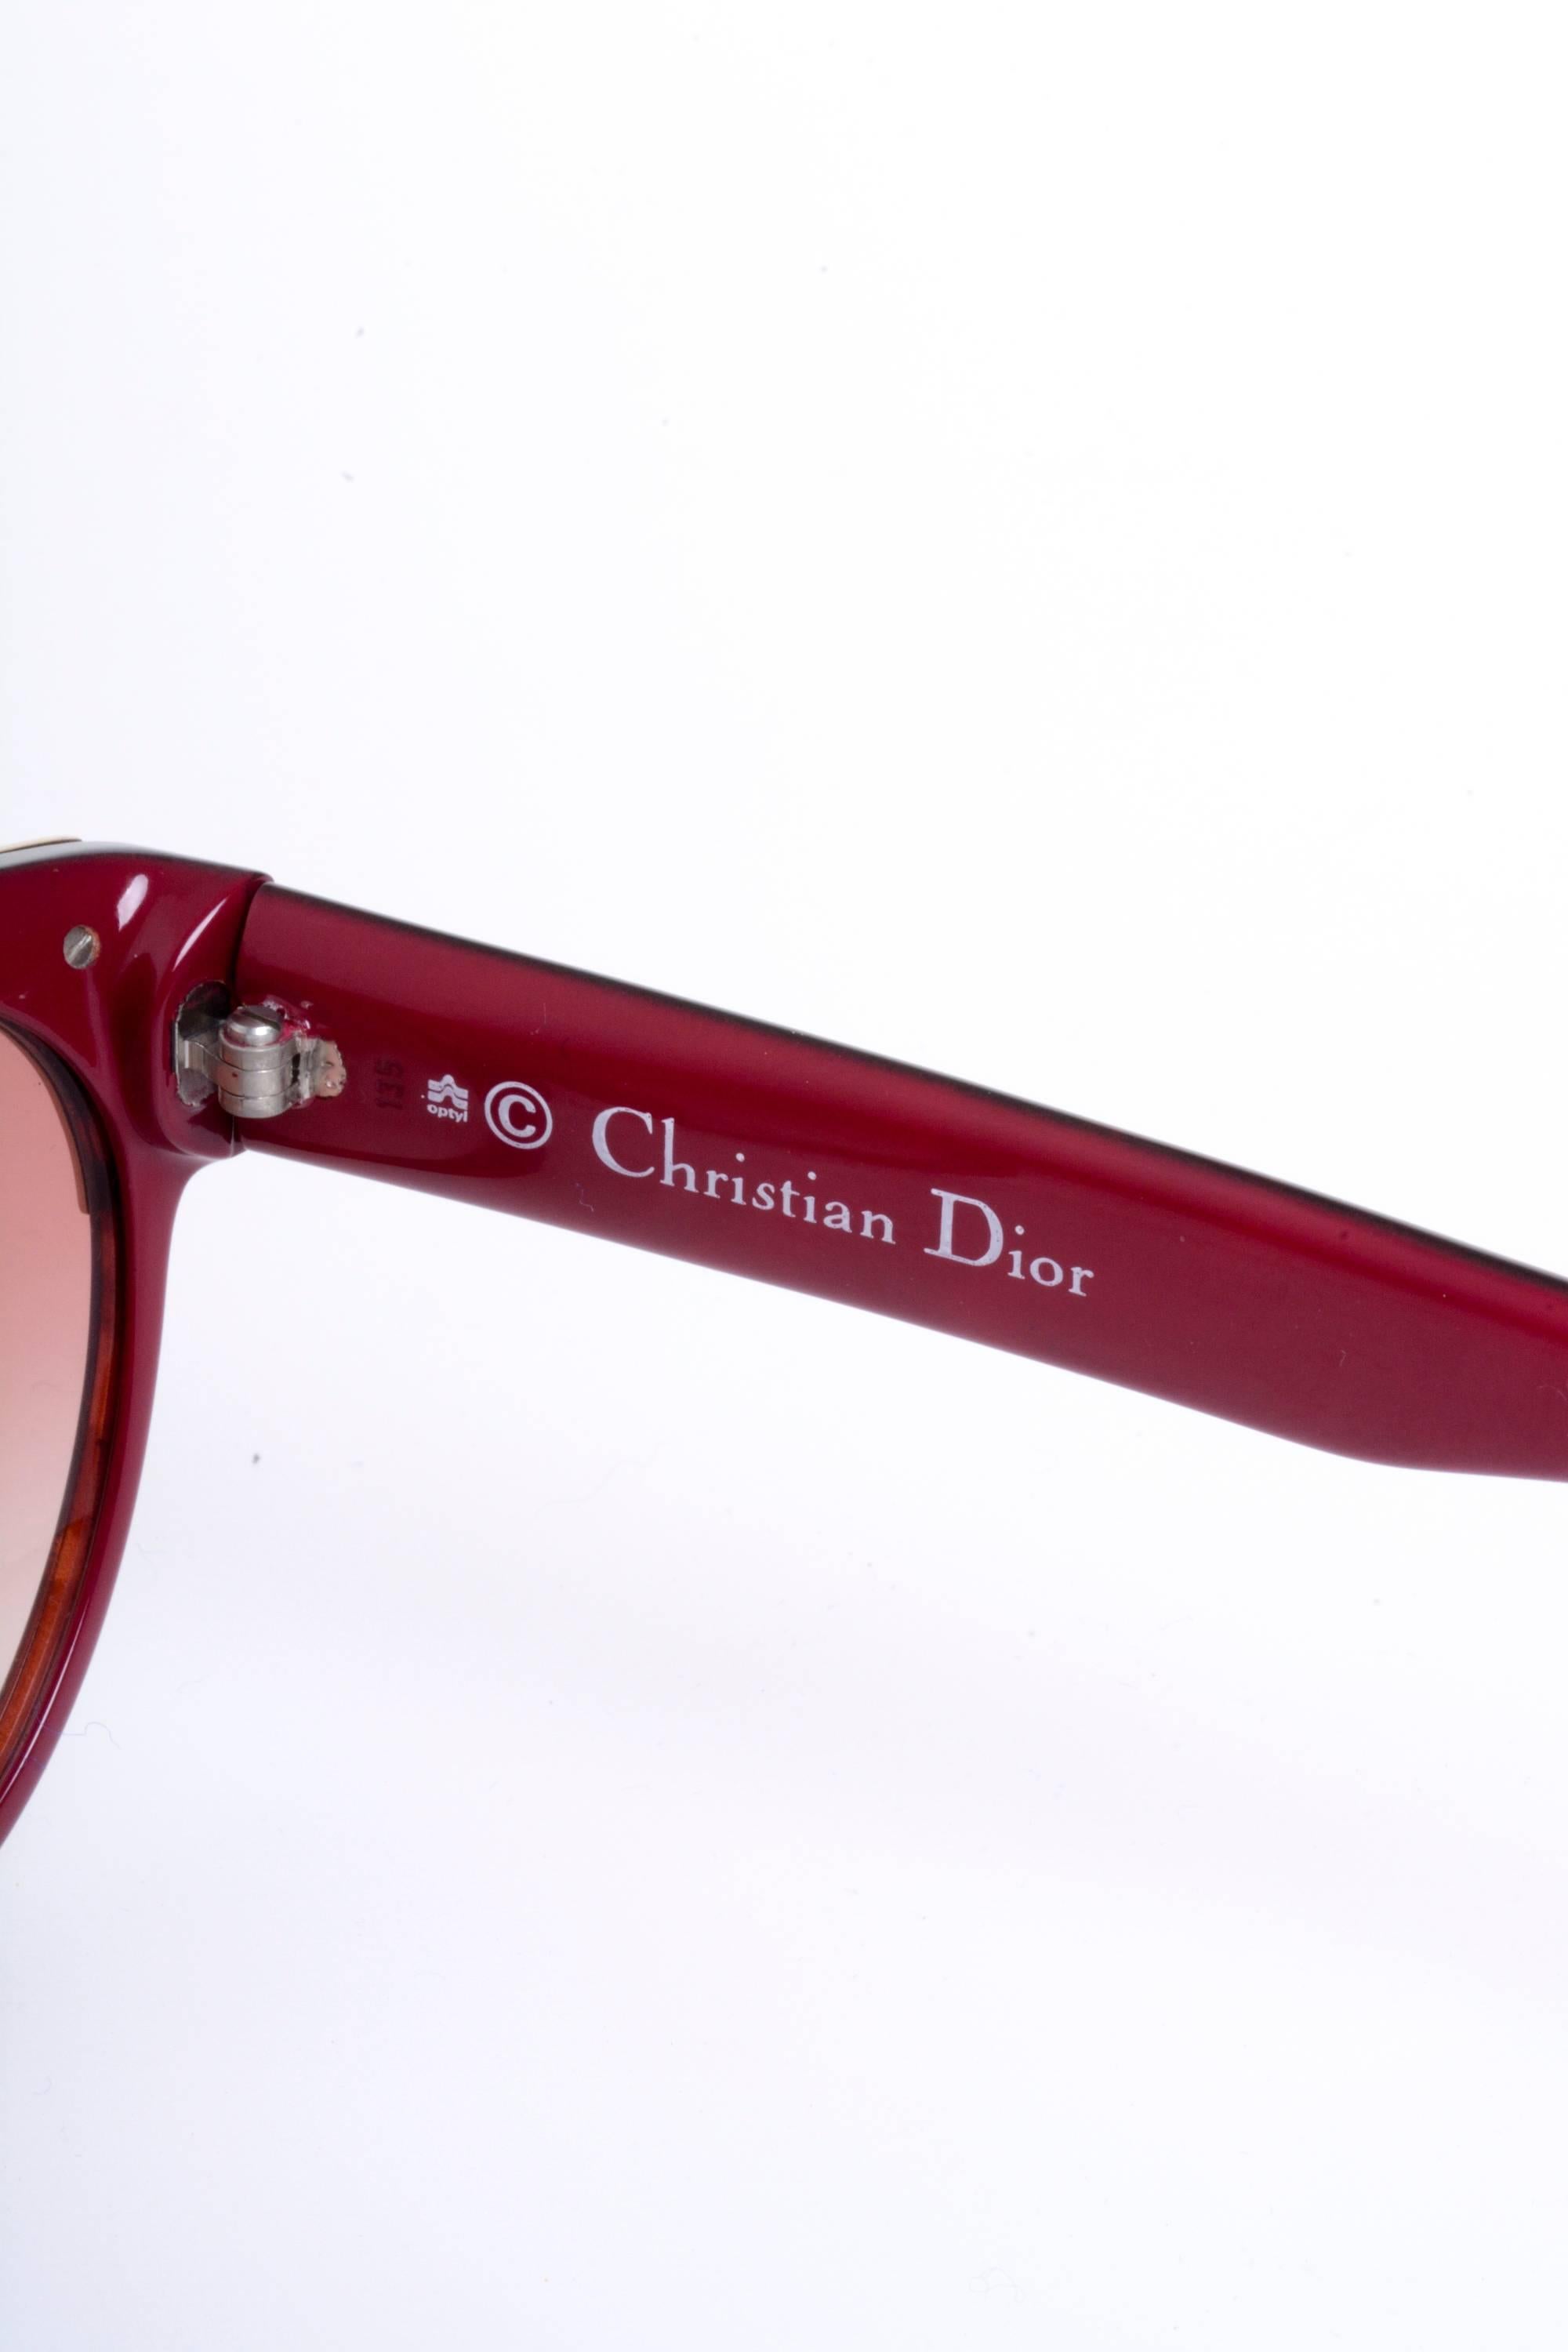 1980s Christian Dior Sunglasses In Excellent Condition For Sale In Milan, Italy